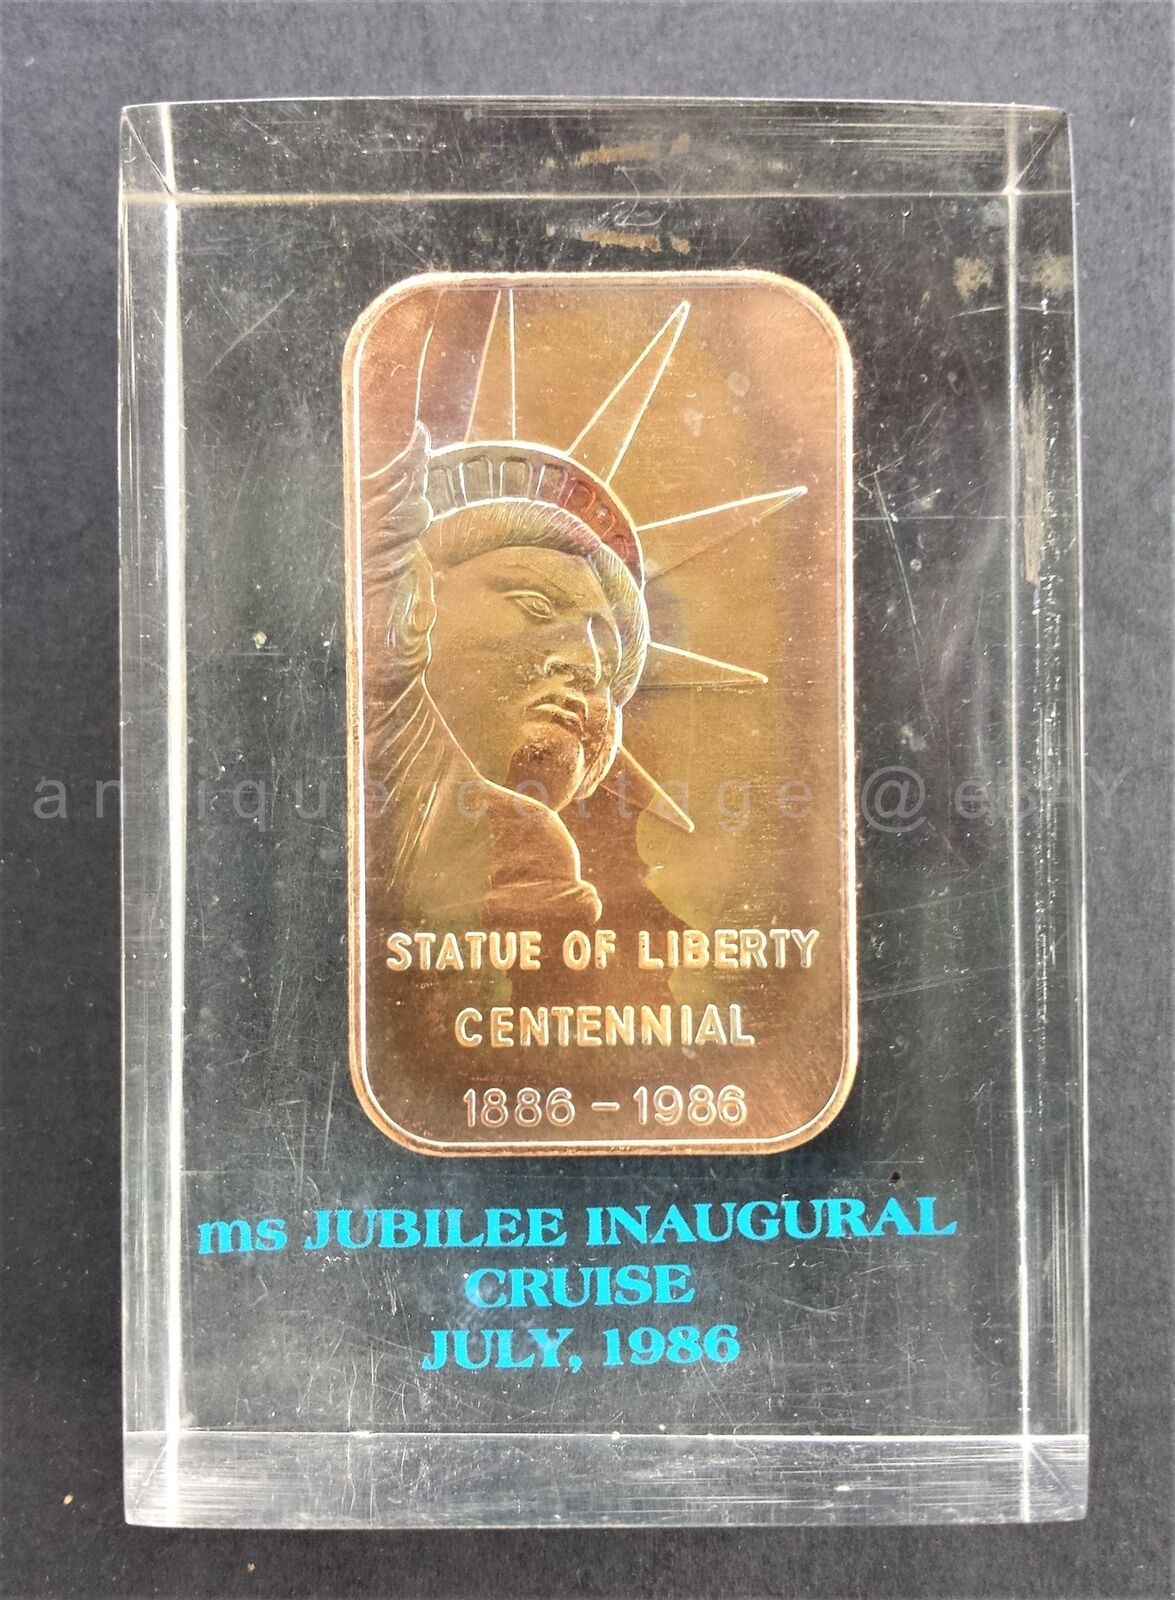 1986 MS JUBILEE INAUGURAL CRUISE PAPERWEIGHT advertise STATUE LIBERTY centennial